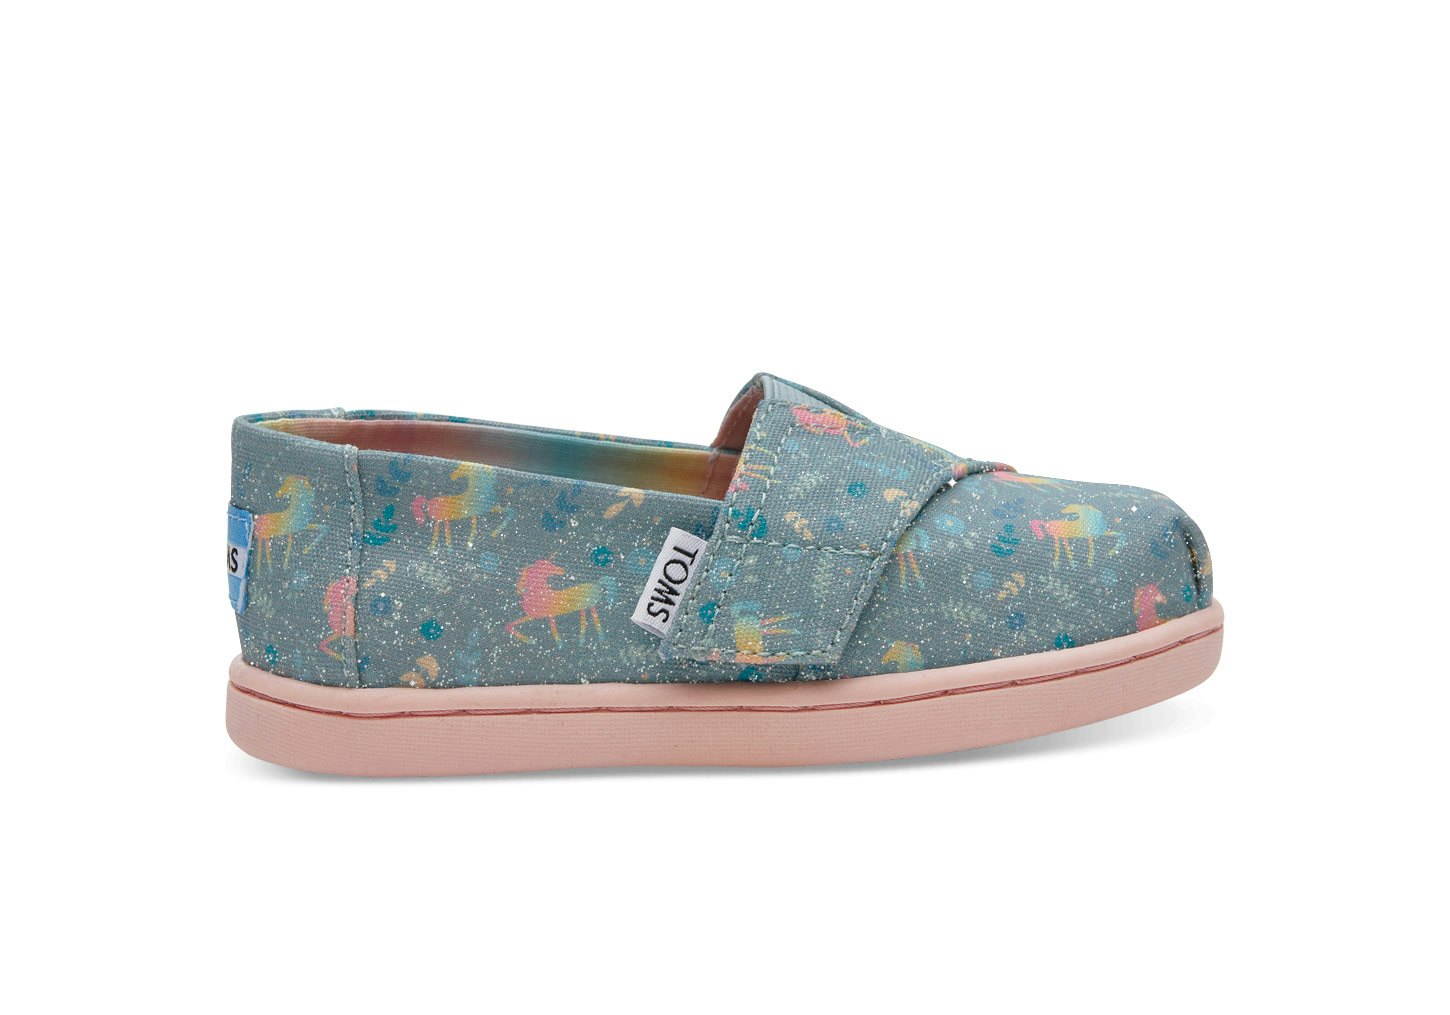 Where To Buy TOMS' Unicorn Shoes If You 